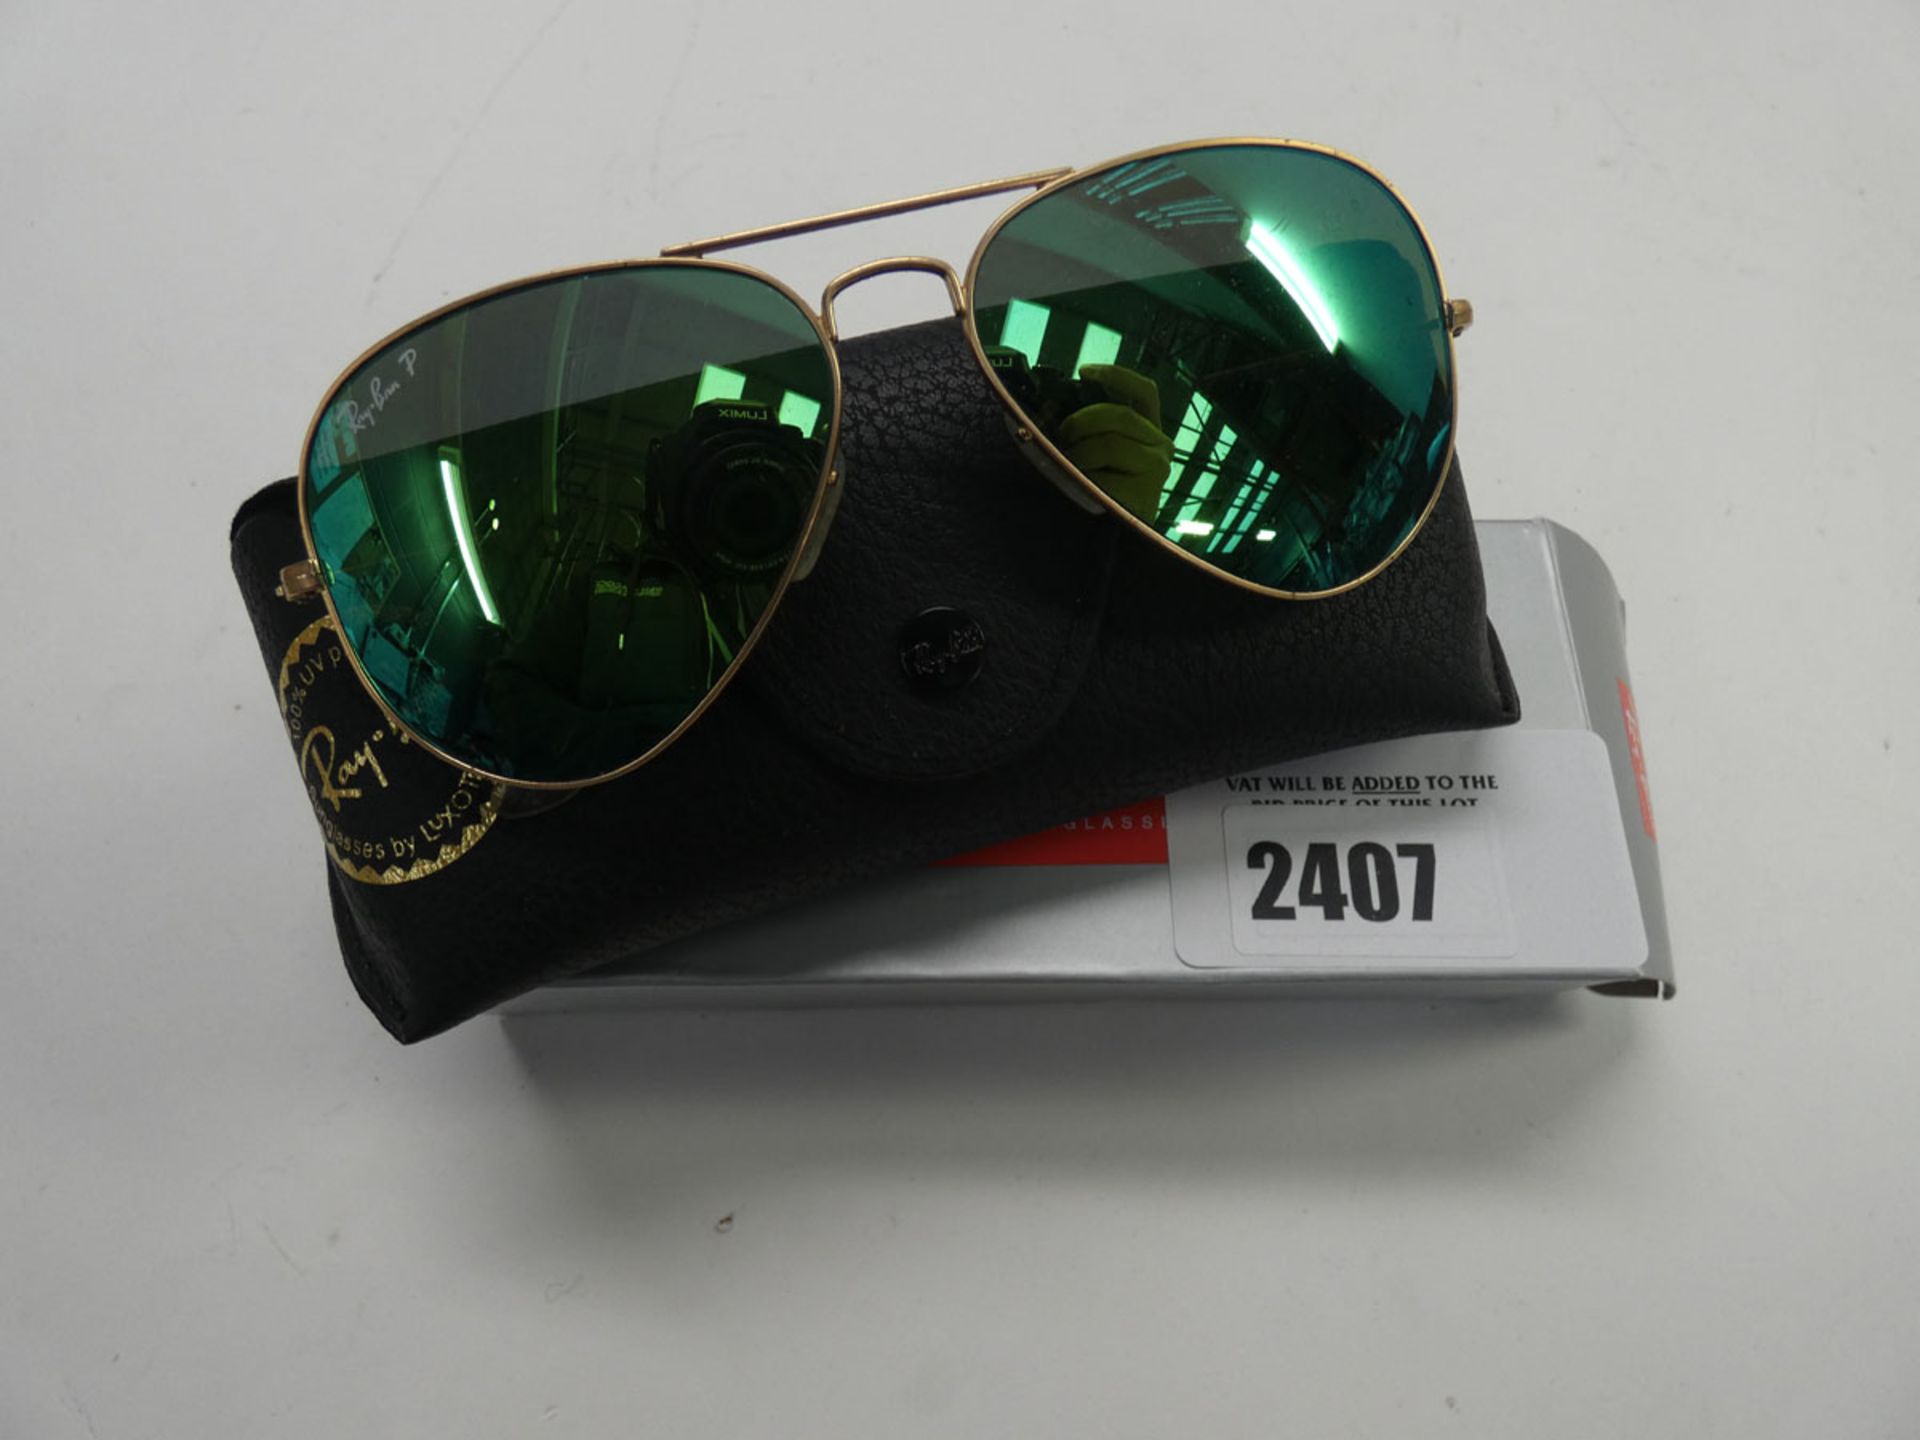 Ray-Ban RB3025 sunglasses with case and box